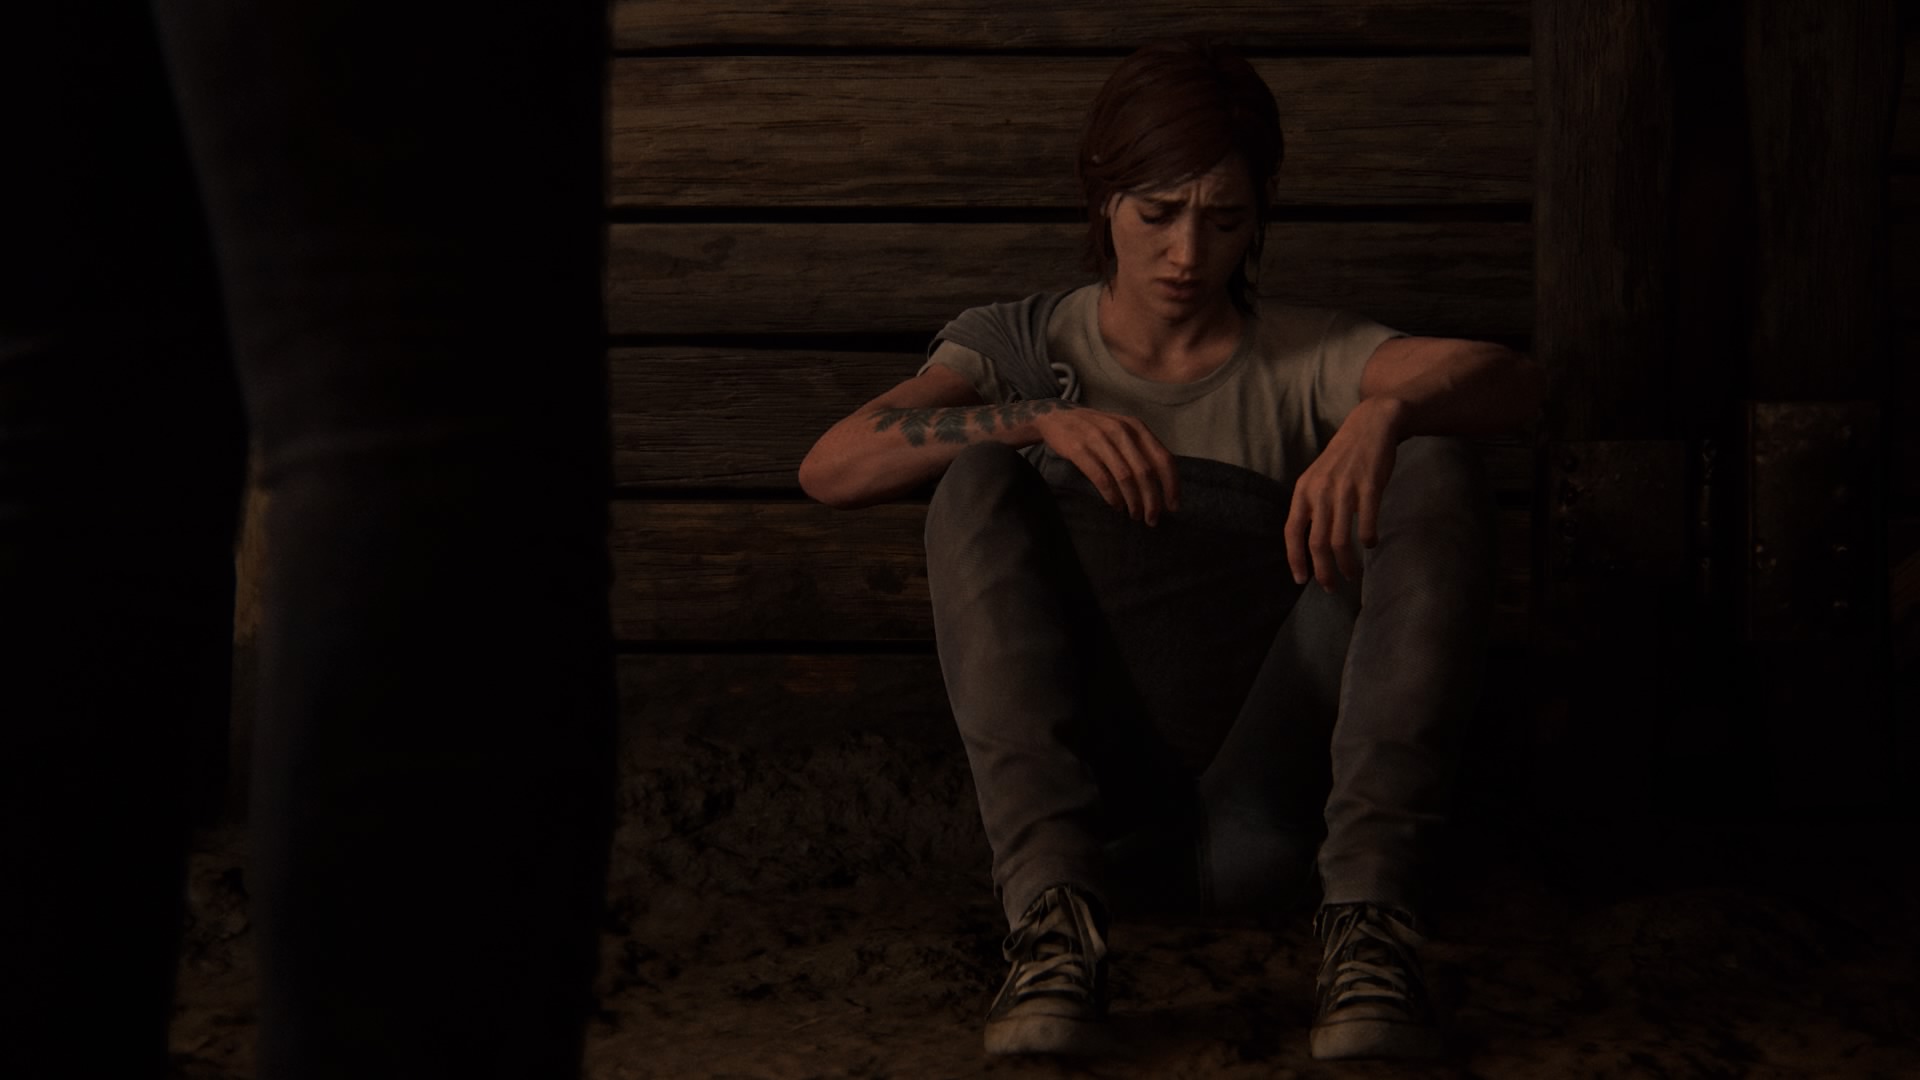 Ellie Abby Anderson HD The Last of Us Part II Wallpapers